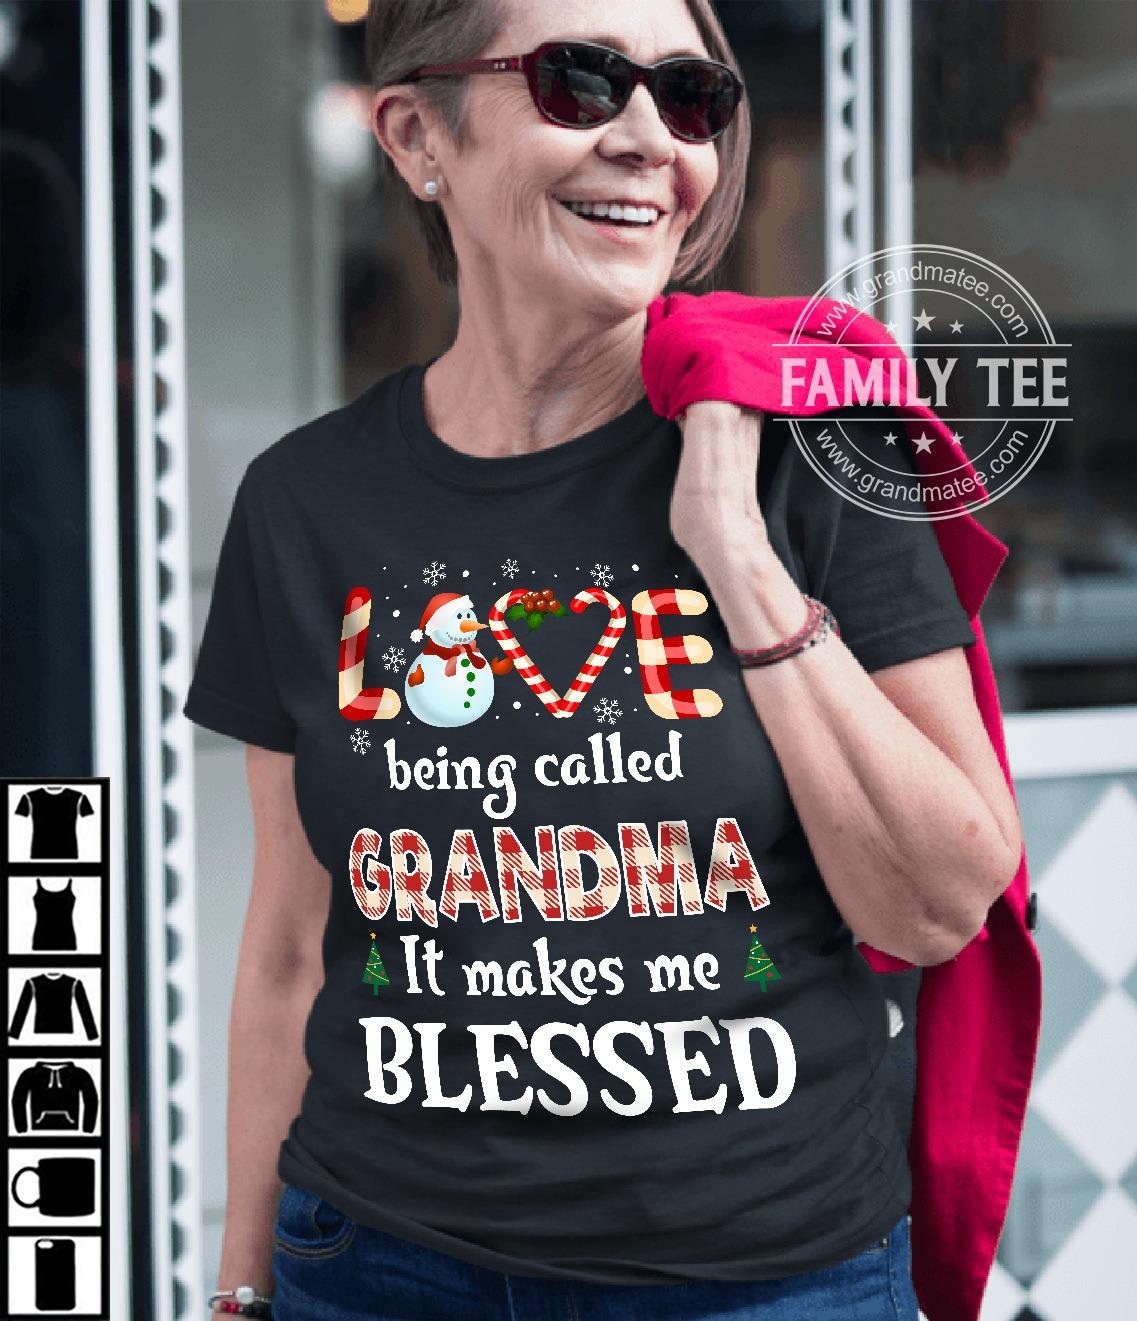 Snowman Grandma Ugly Sweater - Love being called grandma it makes me blessed